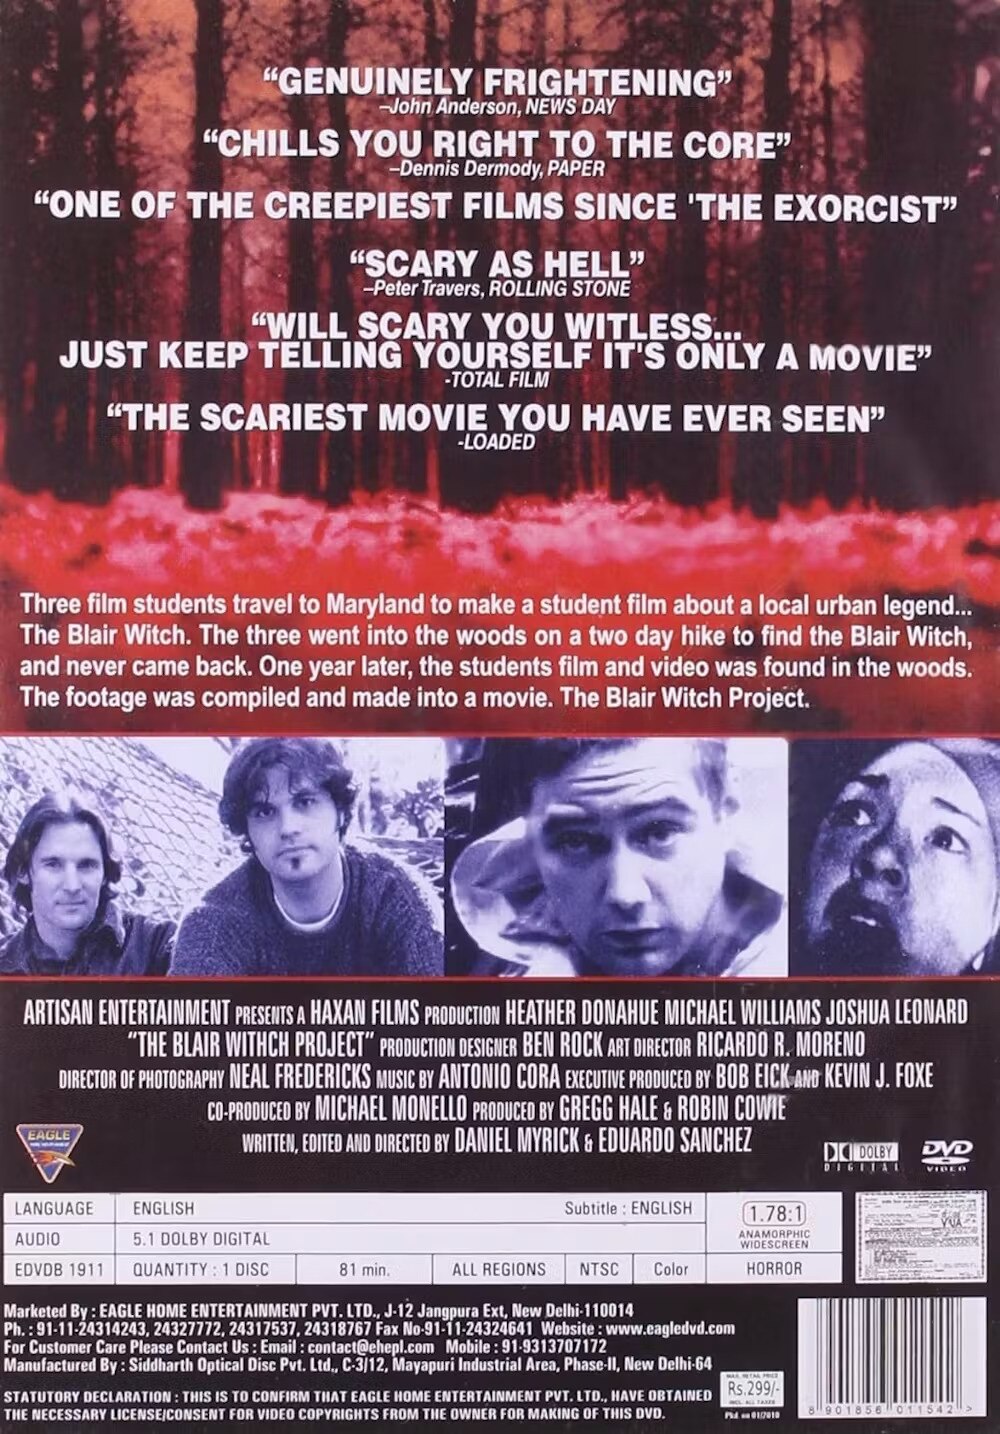 A promotional poster for the 1999 film The Blair Witch Project